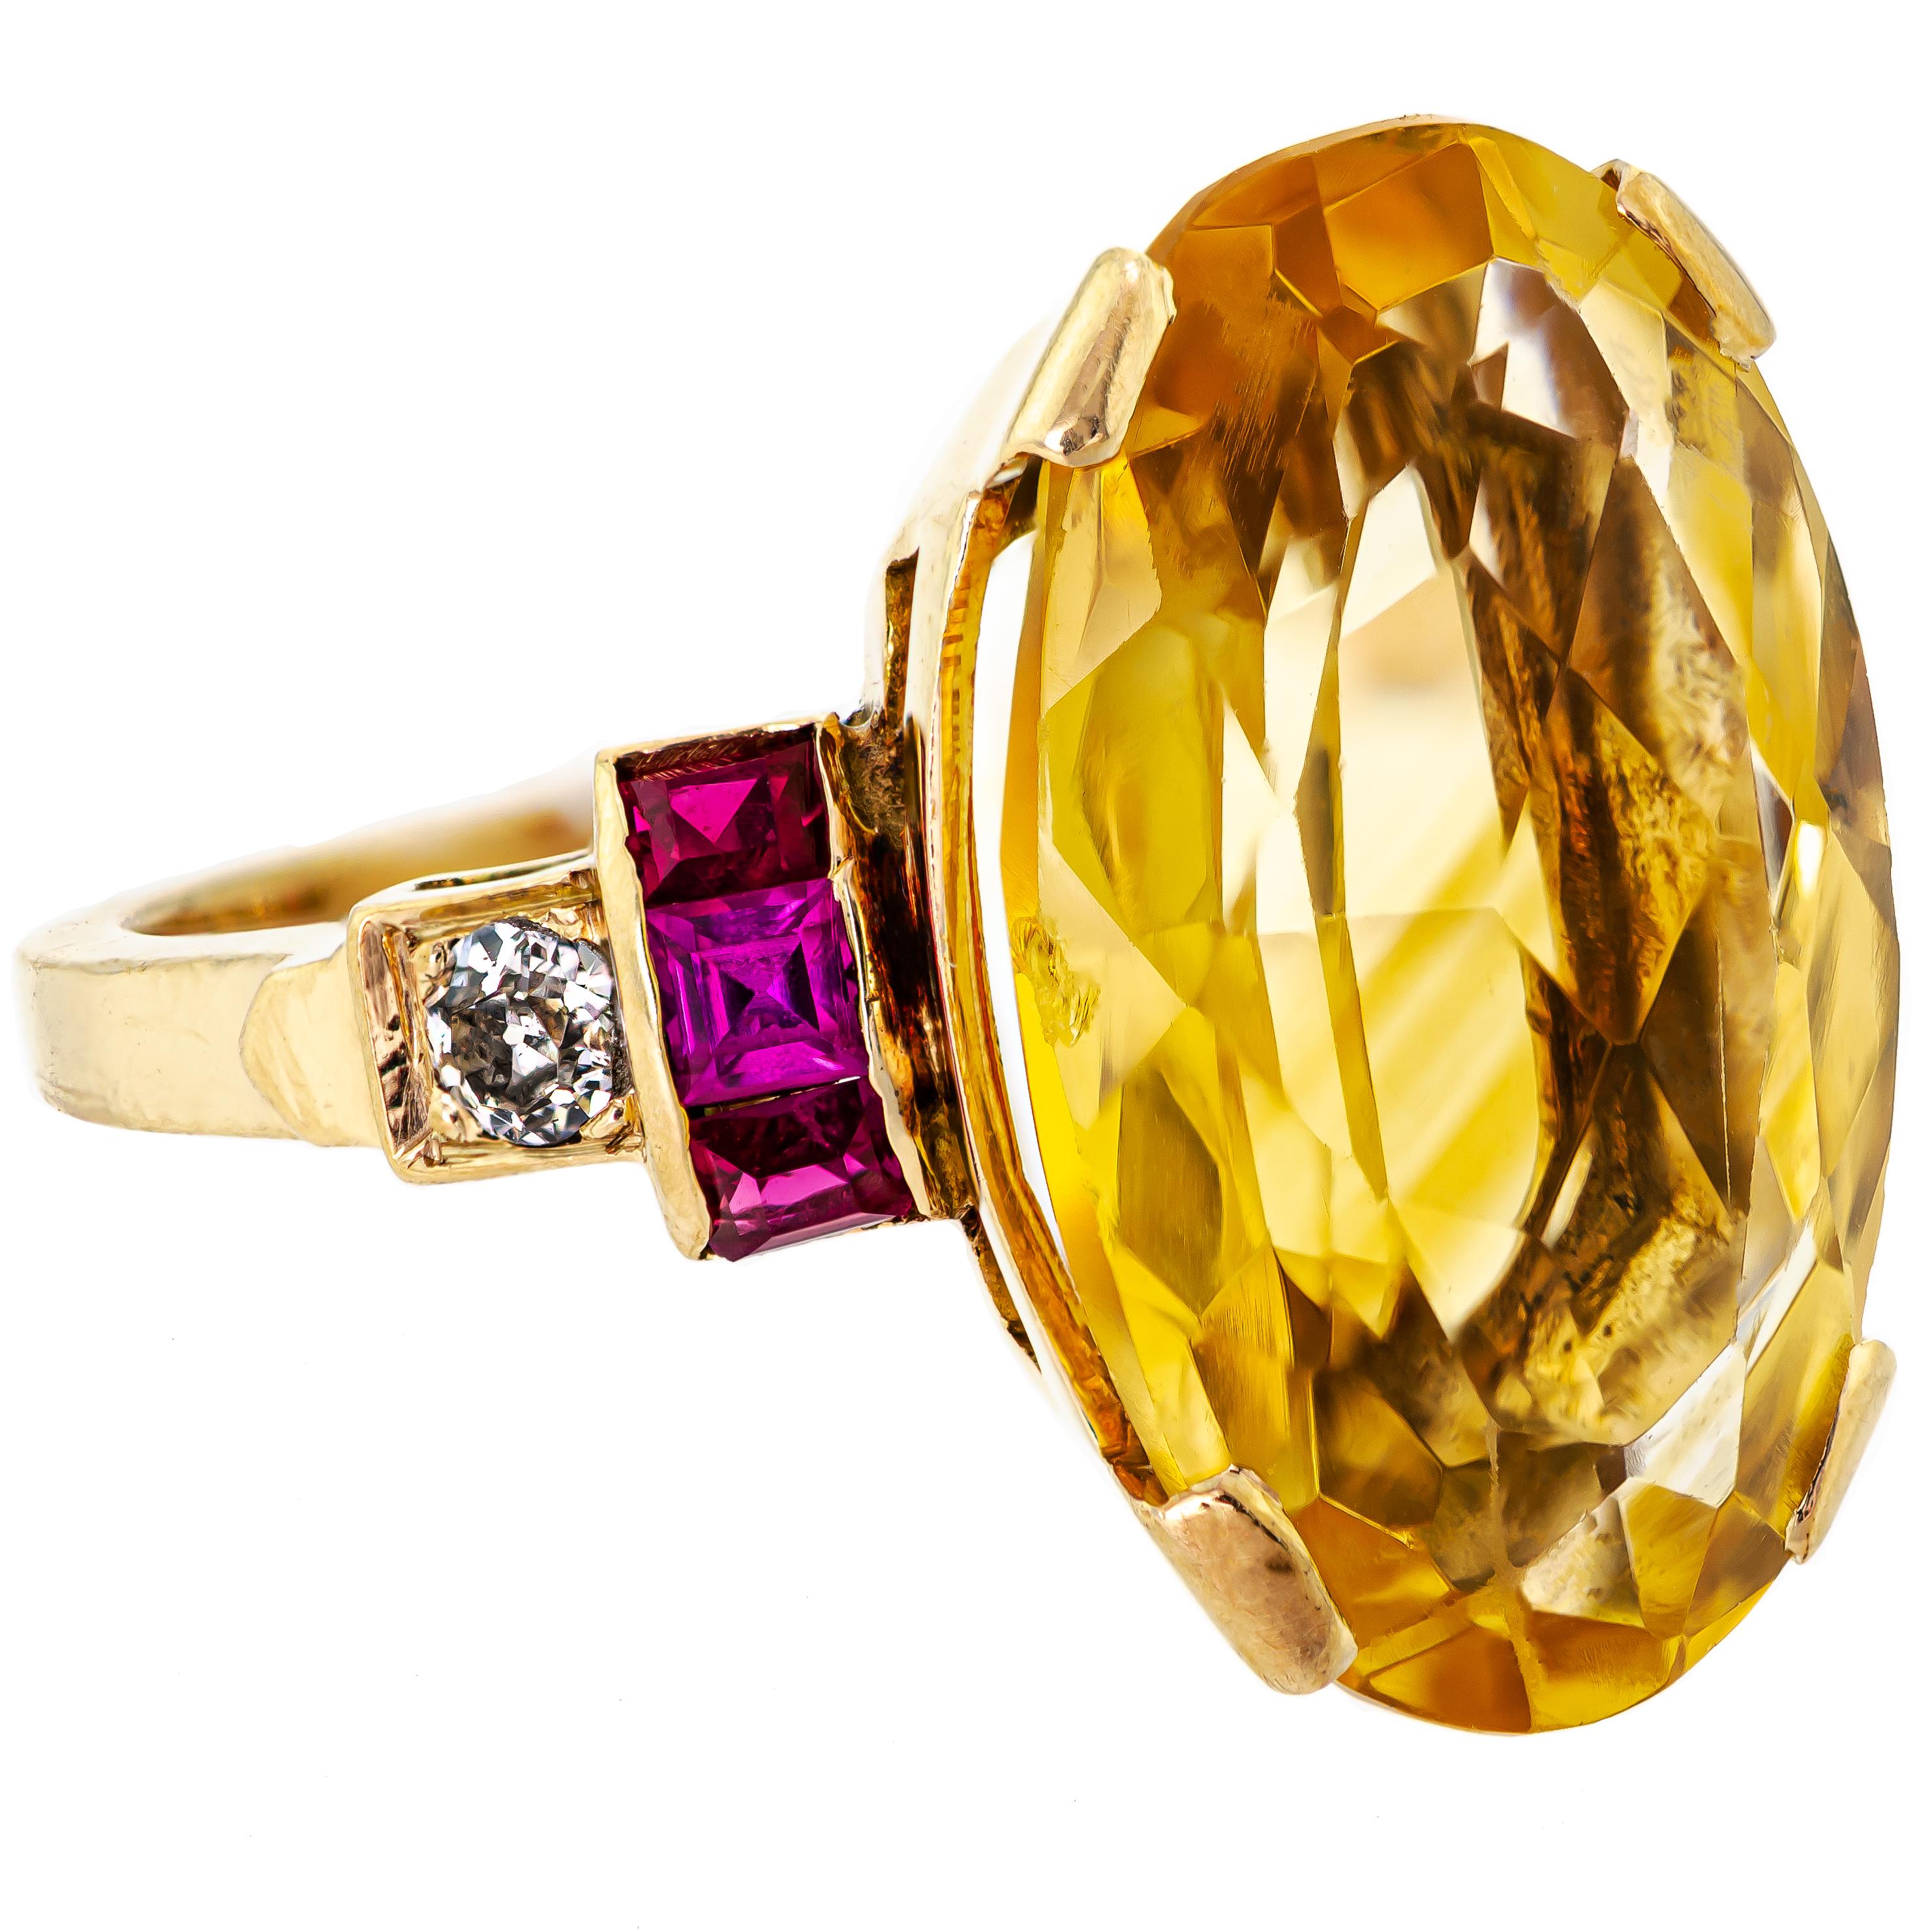 This is a gorgeous Retro-style cocktail ring from circa 1940, made of 14kt yellow gold. The ring features a stunning oval-shaped brilliant-cut citrine at its center, which is approximately 18mm x 10.9 mm x 6.9 mm in size and weighs approximately